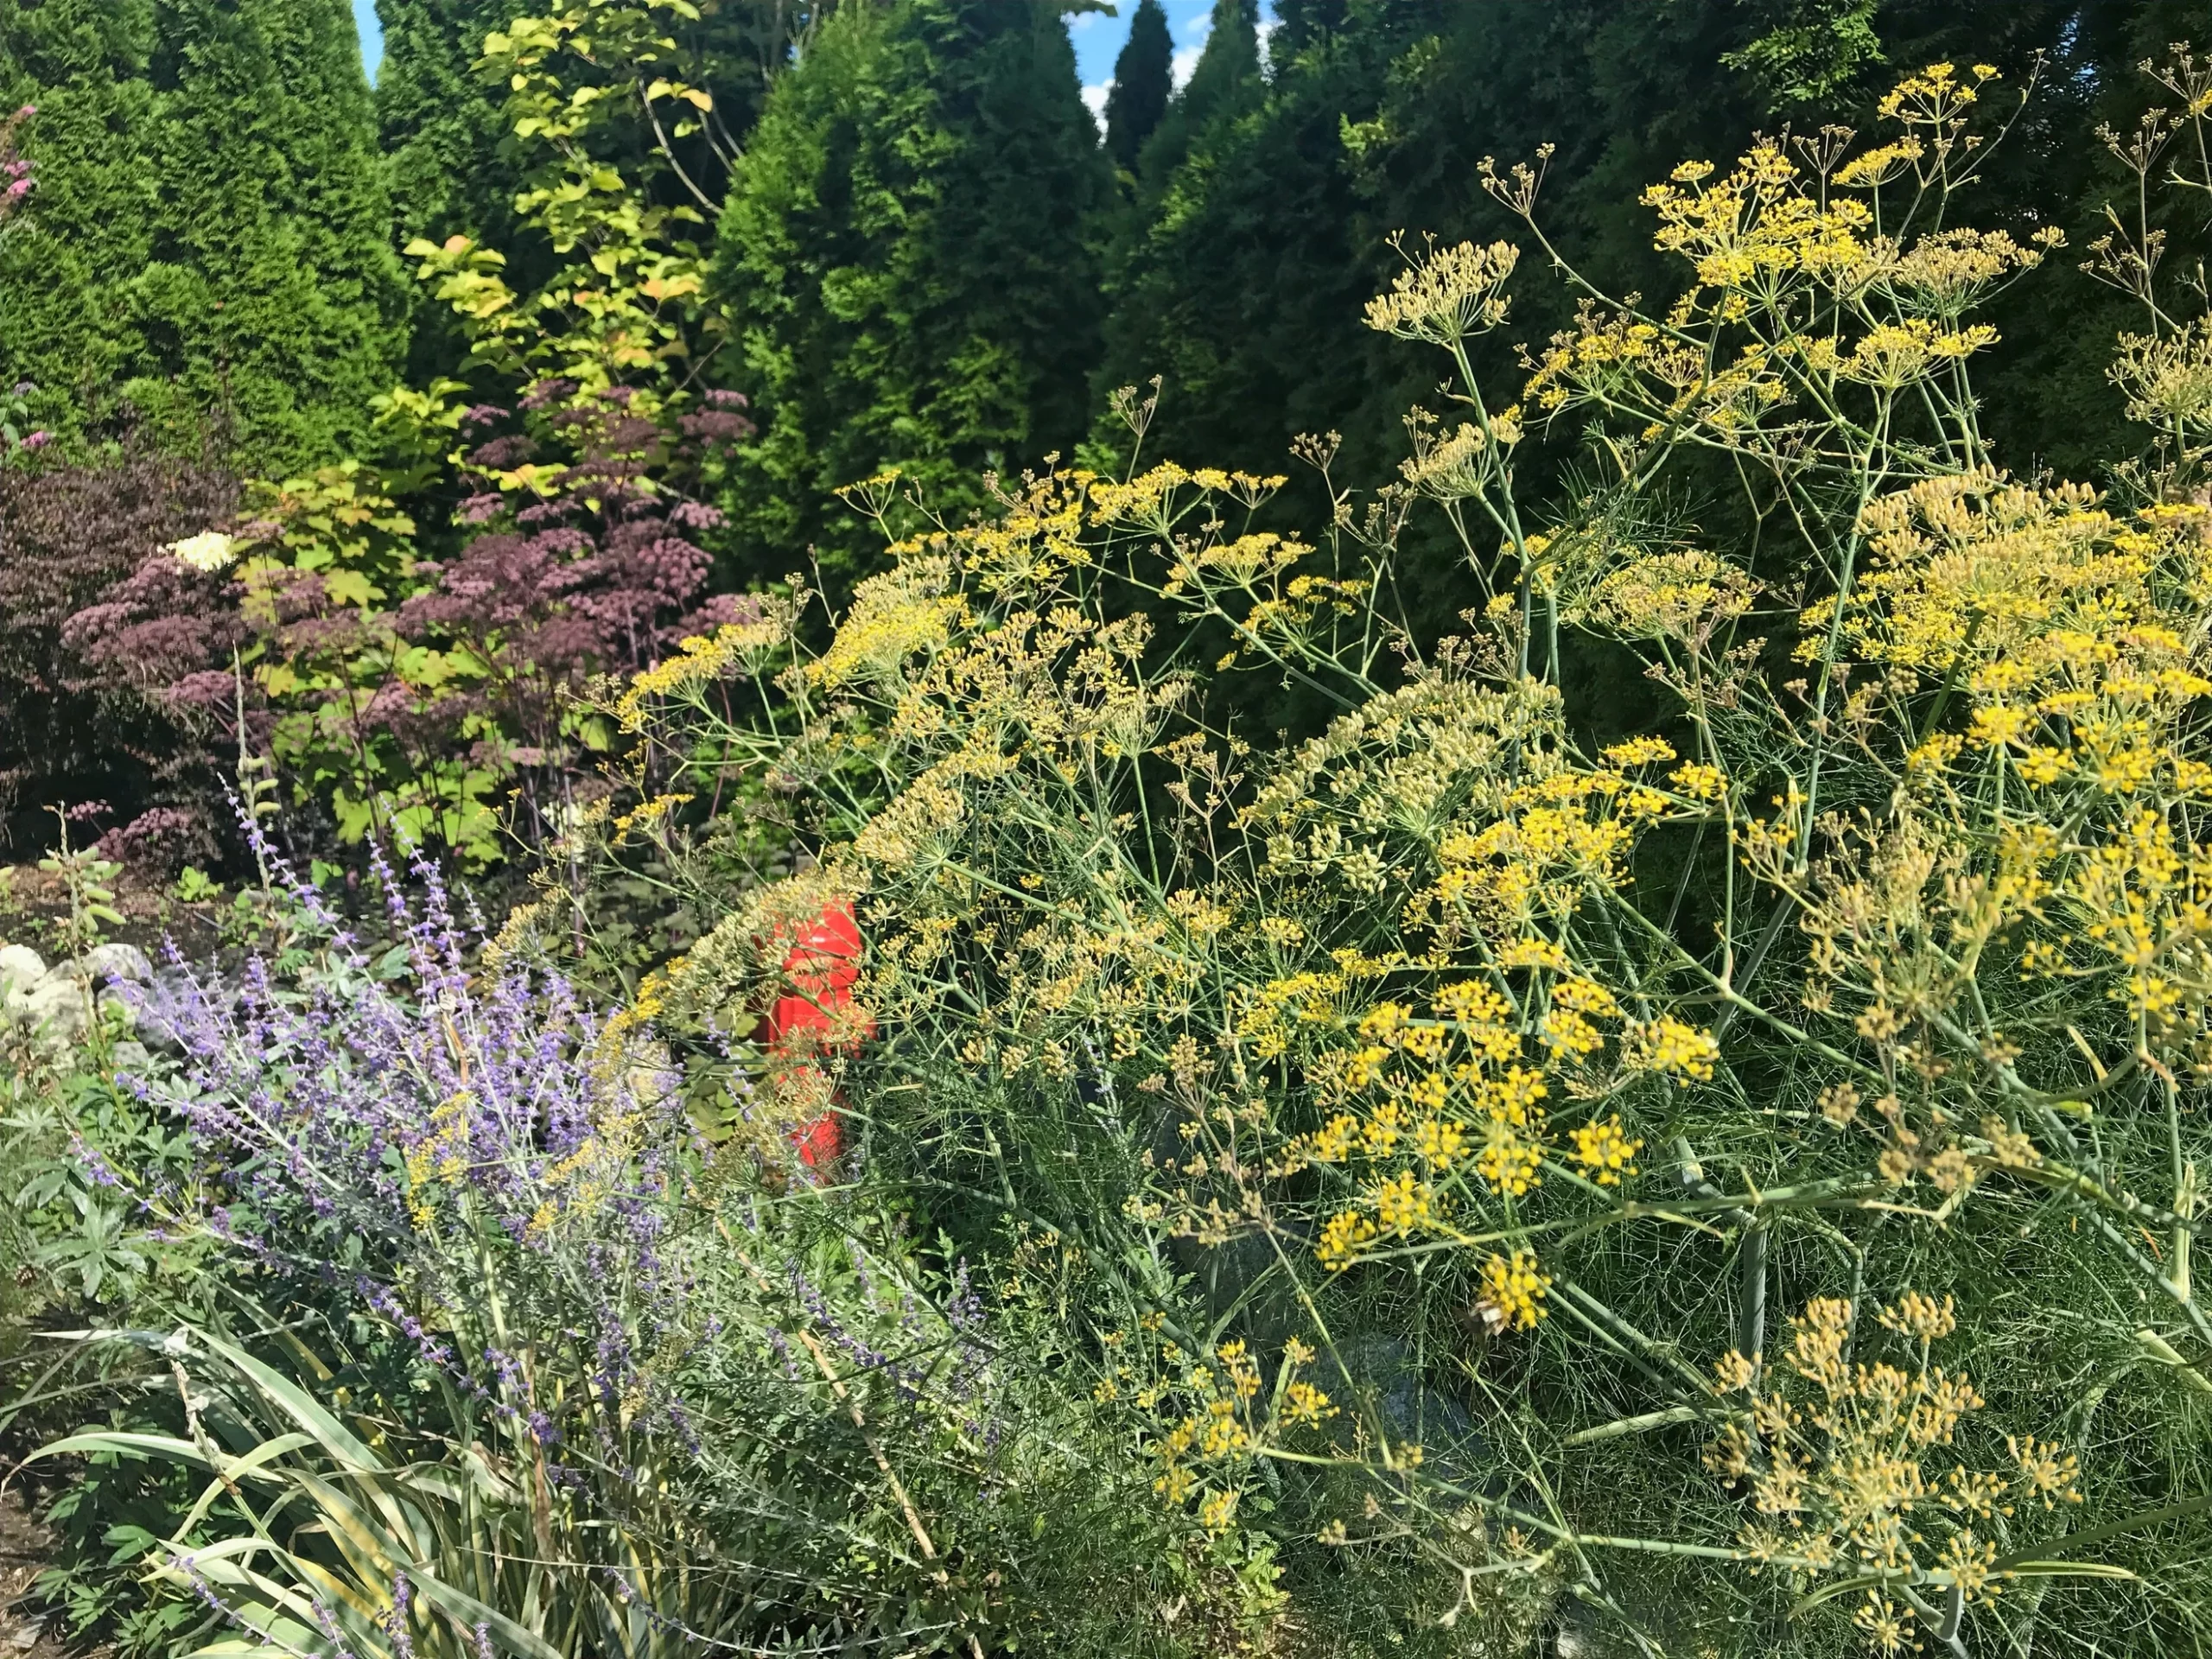 Summer 2018 Giant Dill and Perovskia take centre stage